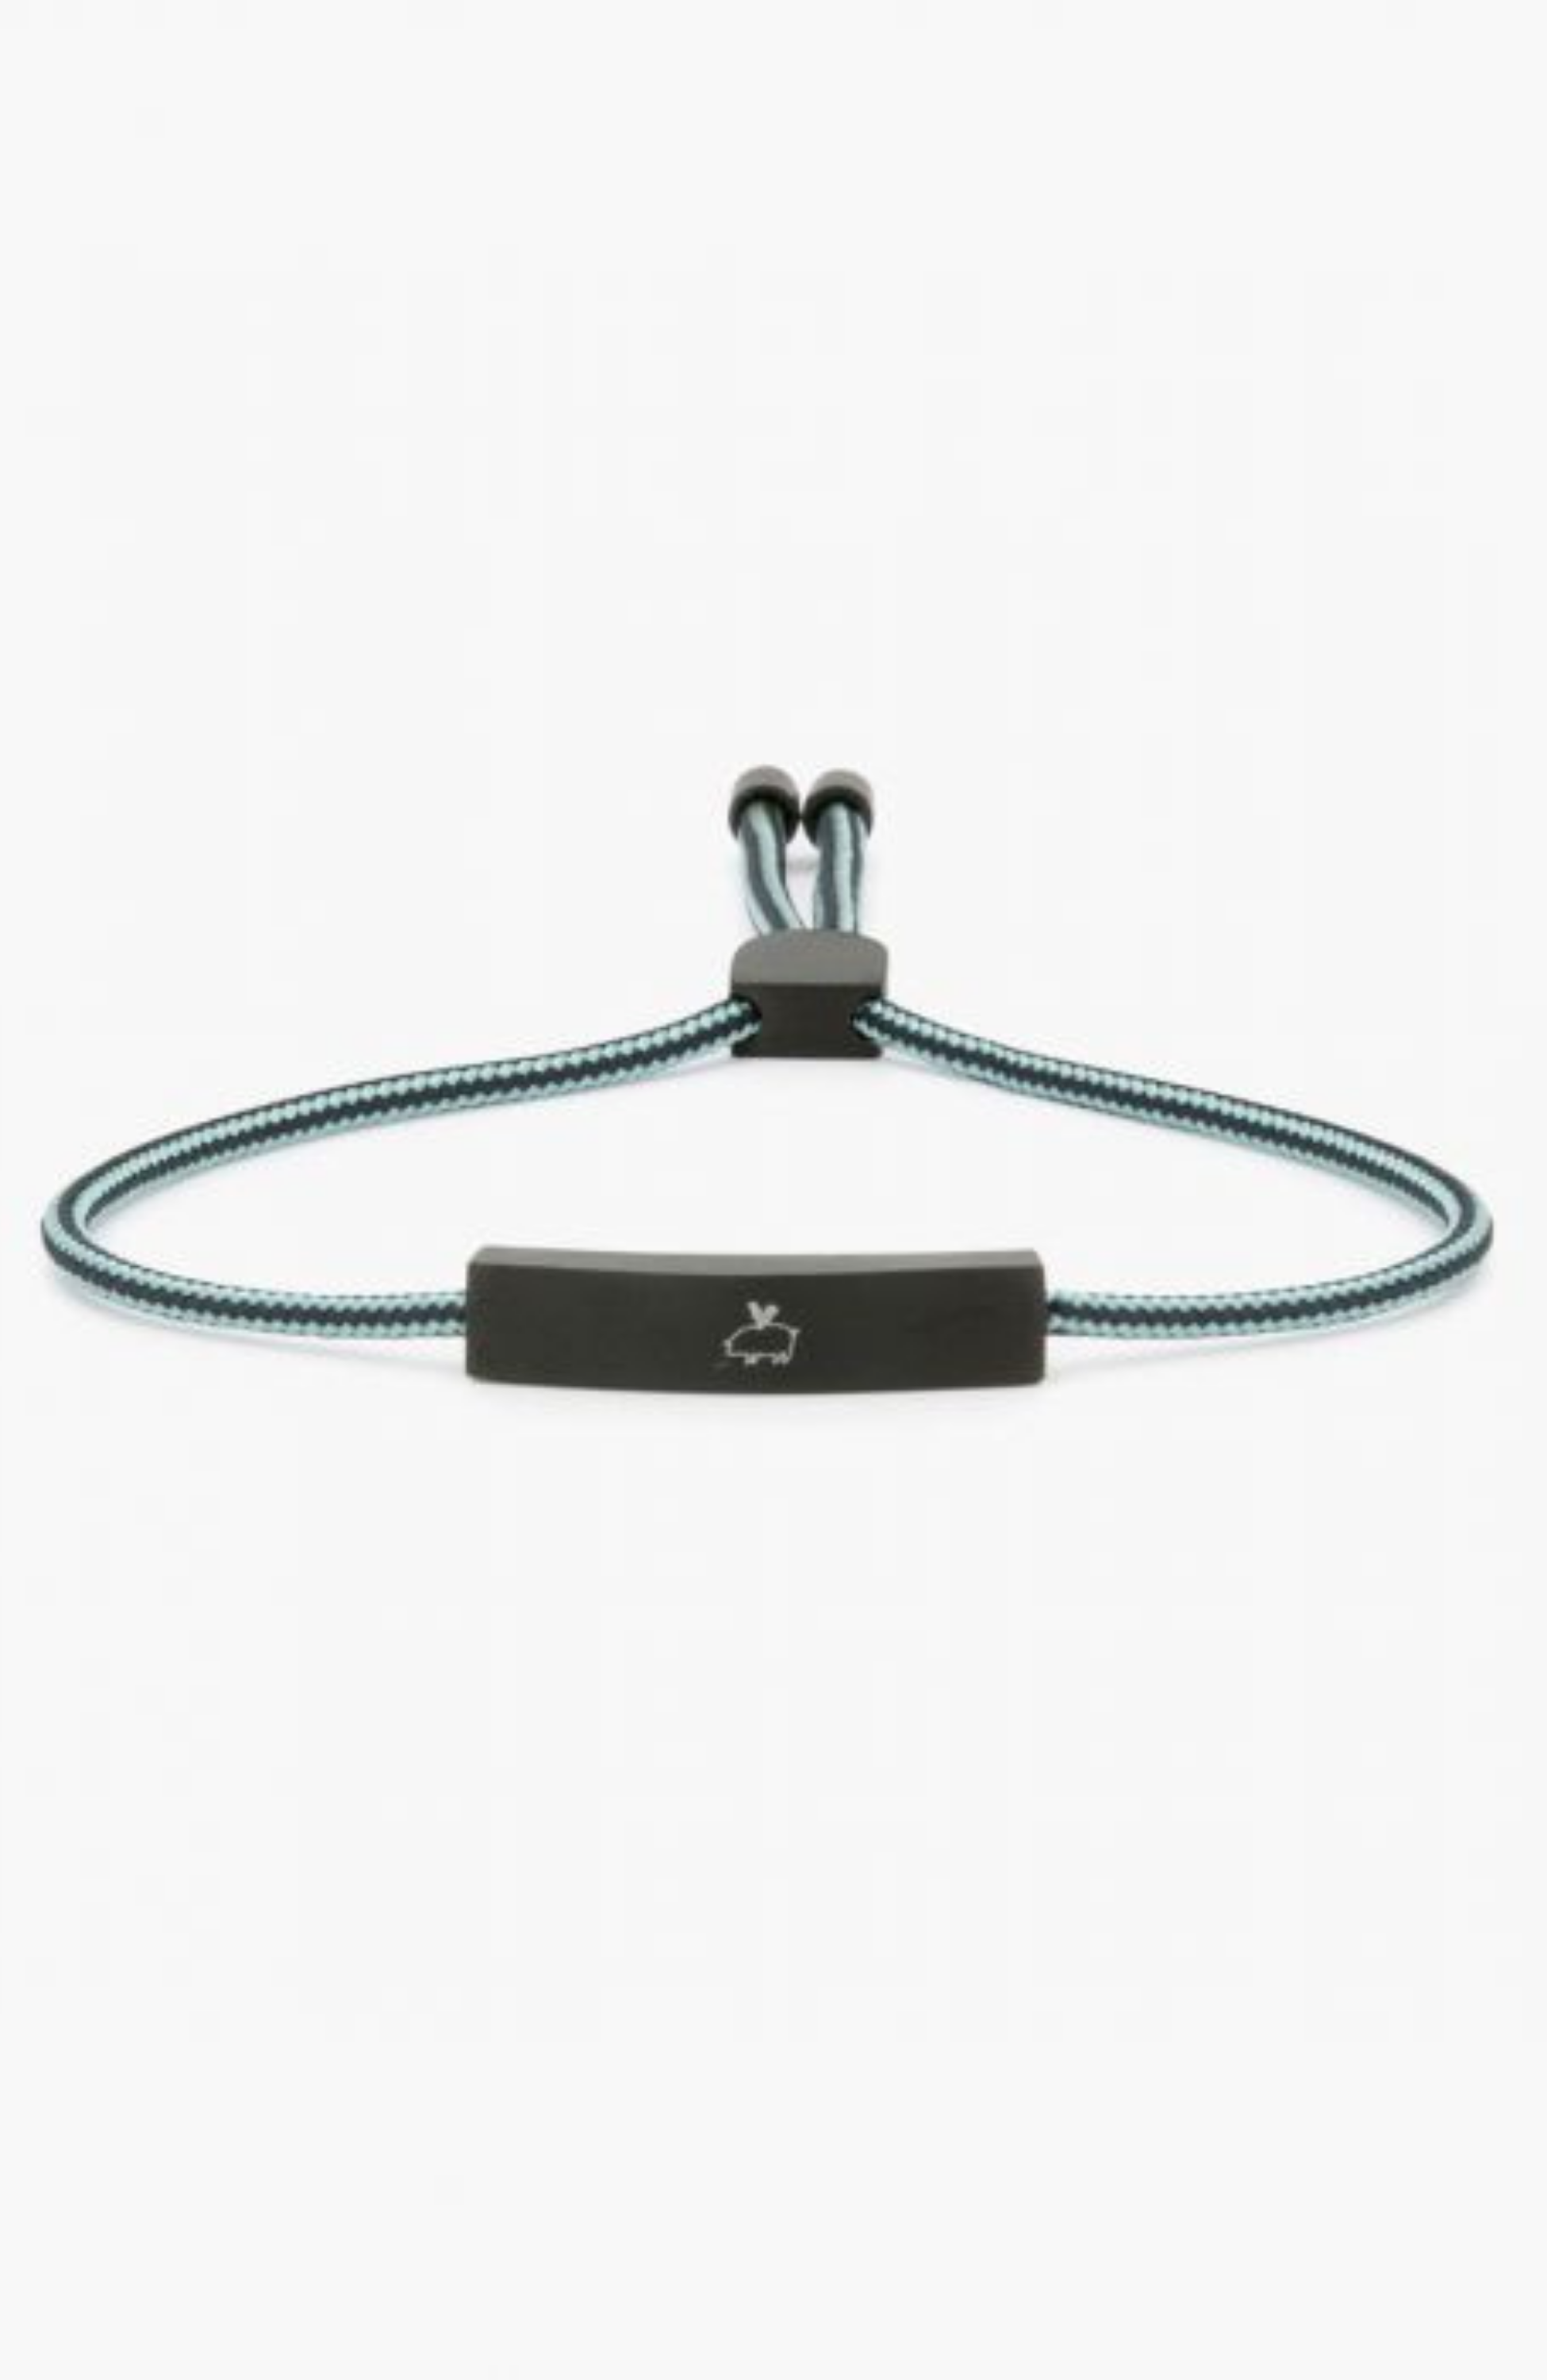 London Harness | Pig & Hen Navarch Cuff Bracelet: Stainless Steel Boss of  Bosses Bracelet | Find Perfect Gifts, Luggage, Leather, Handbags